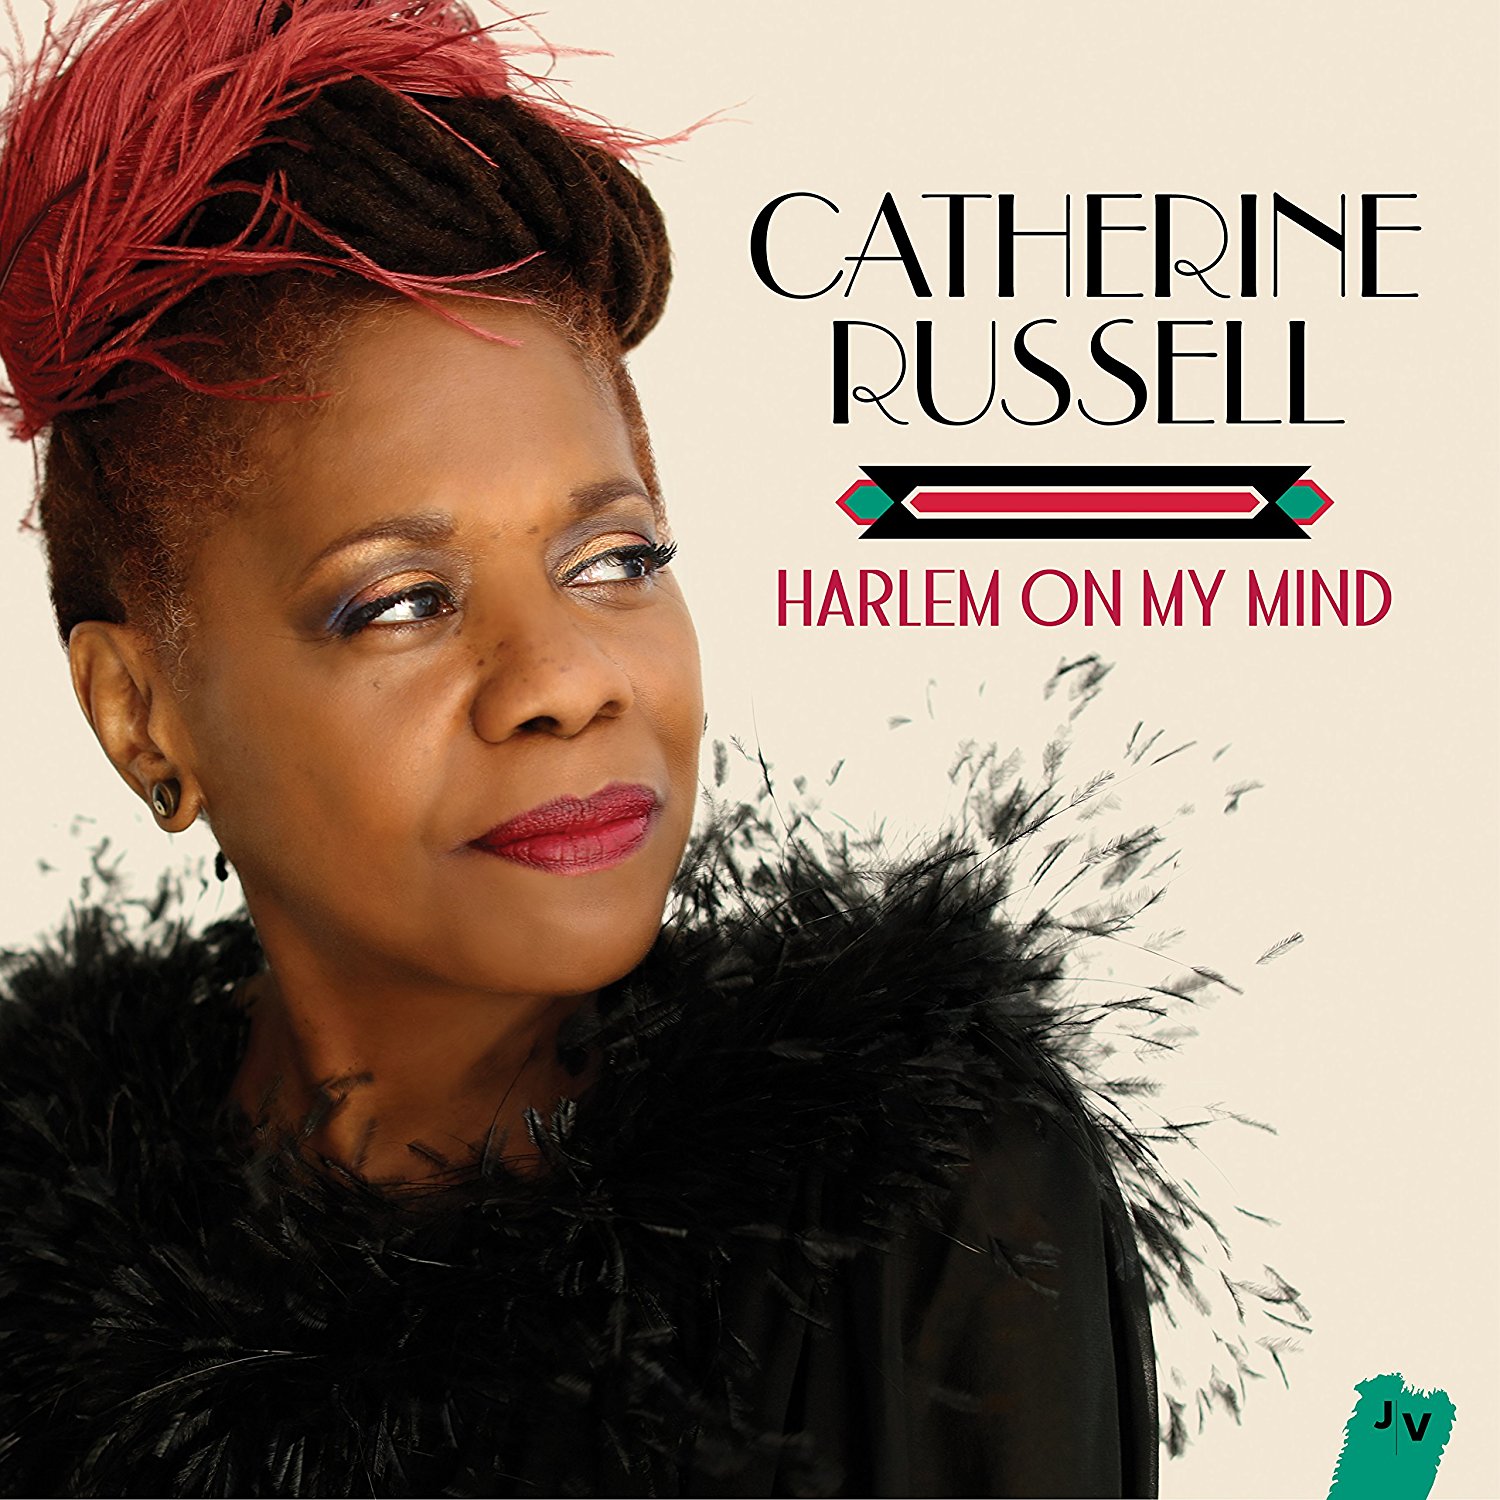 Catherine Russell - Harlem On My Mind (2016) [AcousticSounds FLAC 24bit/96kHz]